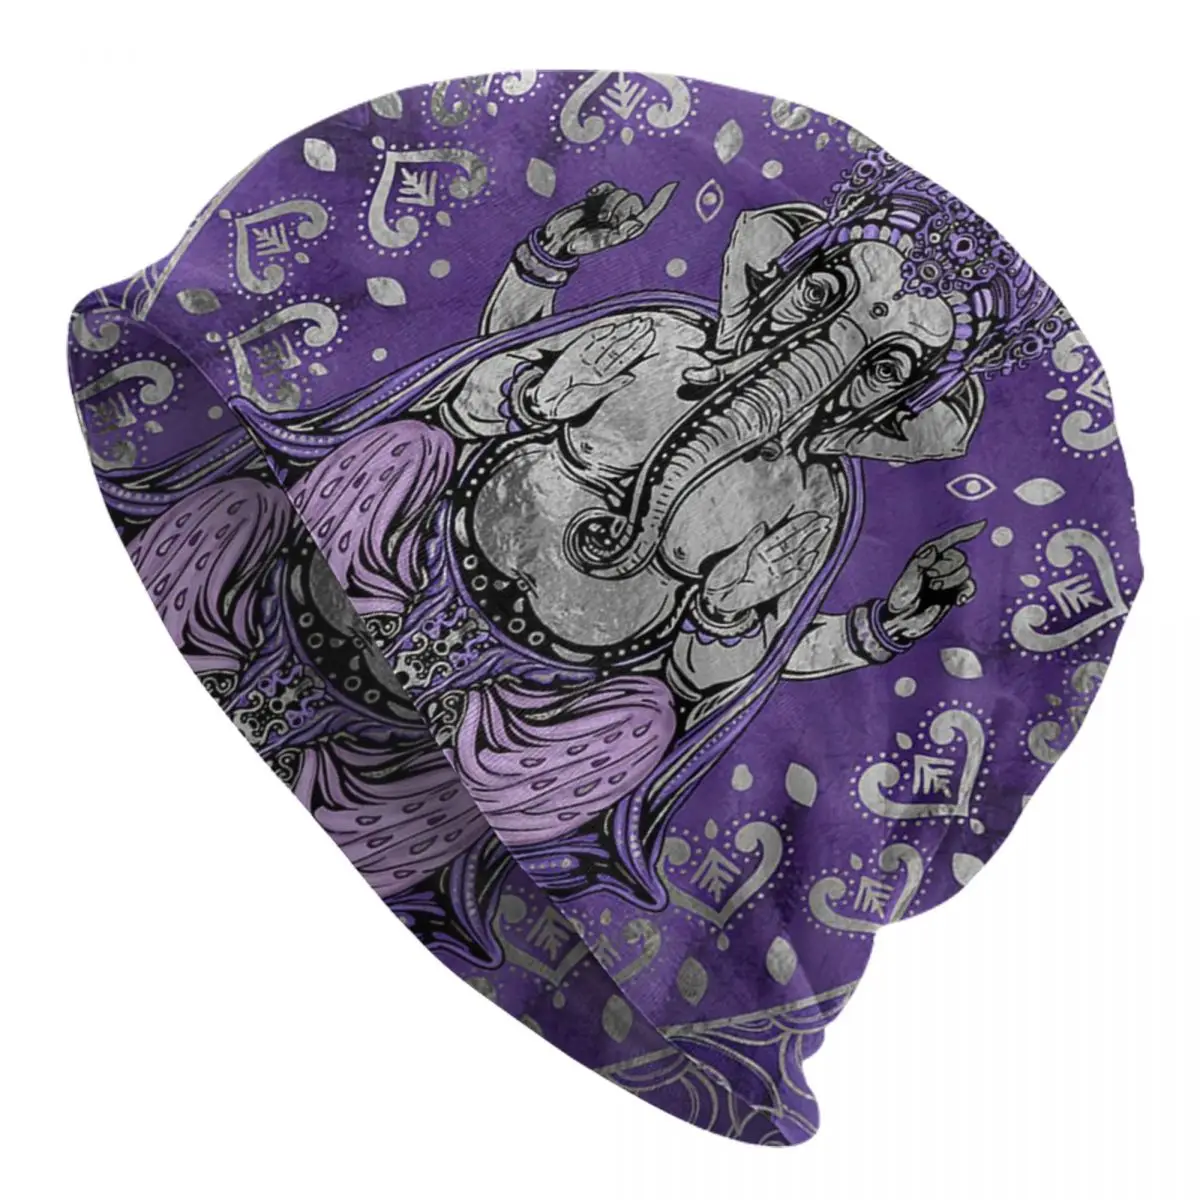 

Ganesha - Silver And Purples Adult Men's Women's Knit Hat Keep warm winter Funny knitted hat